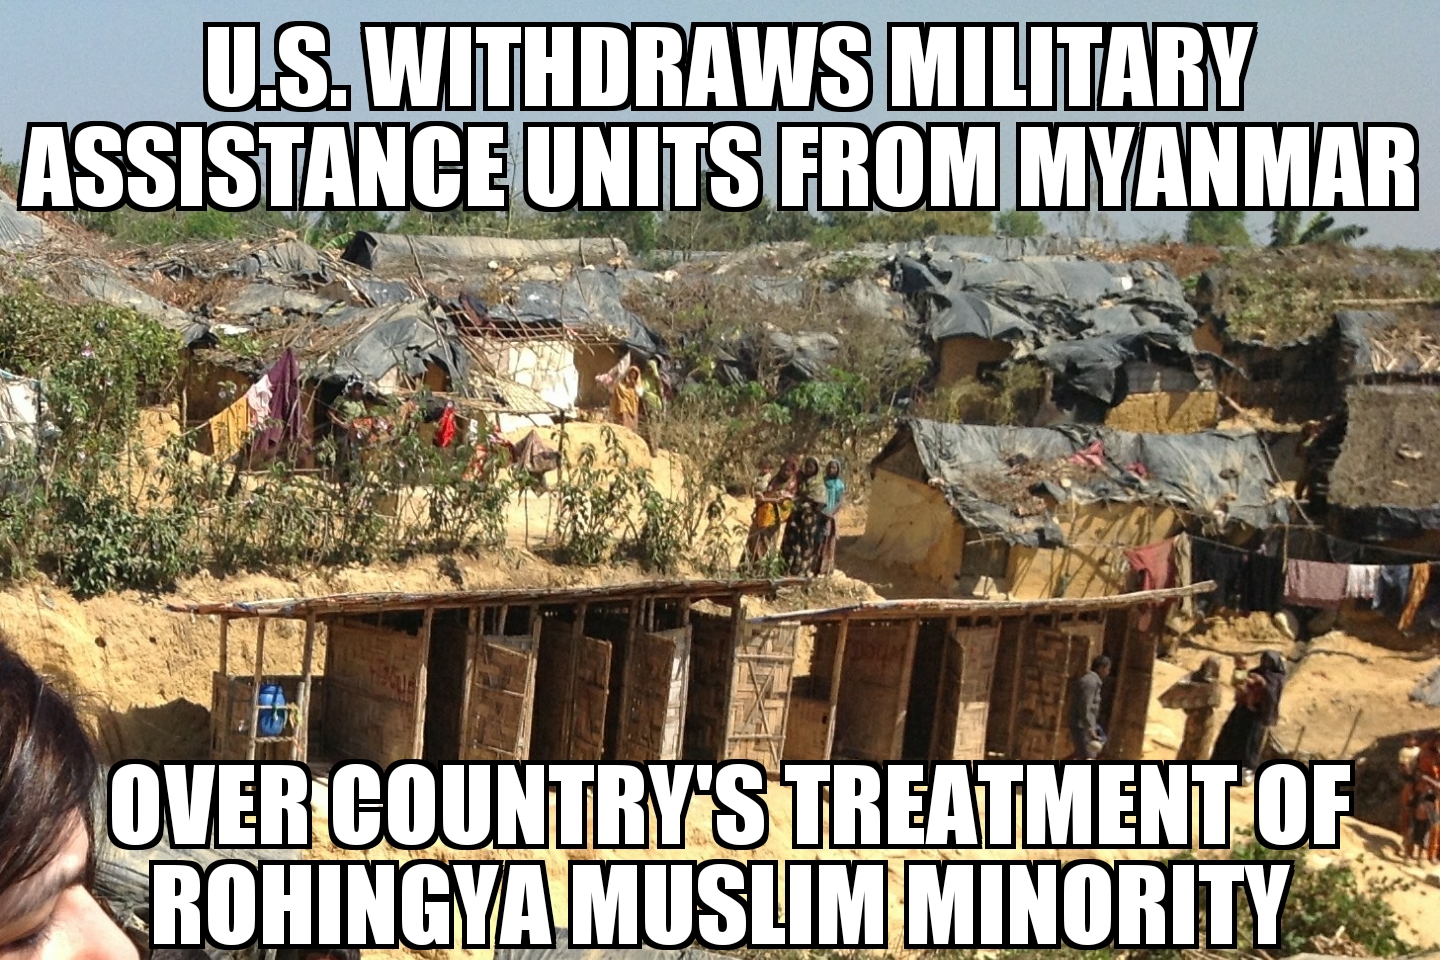 U.S. pulls military assistance from Myanmar